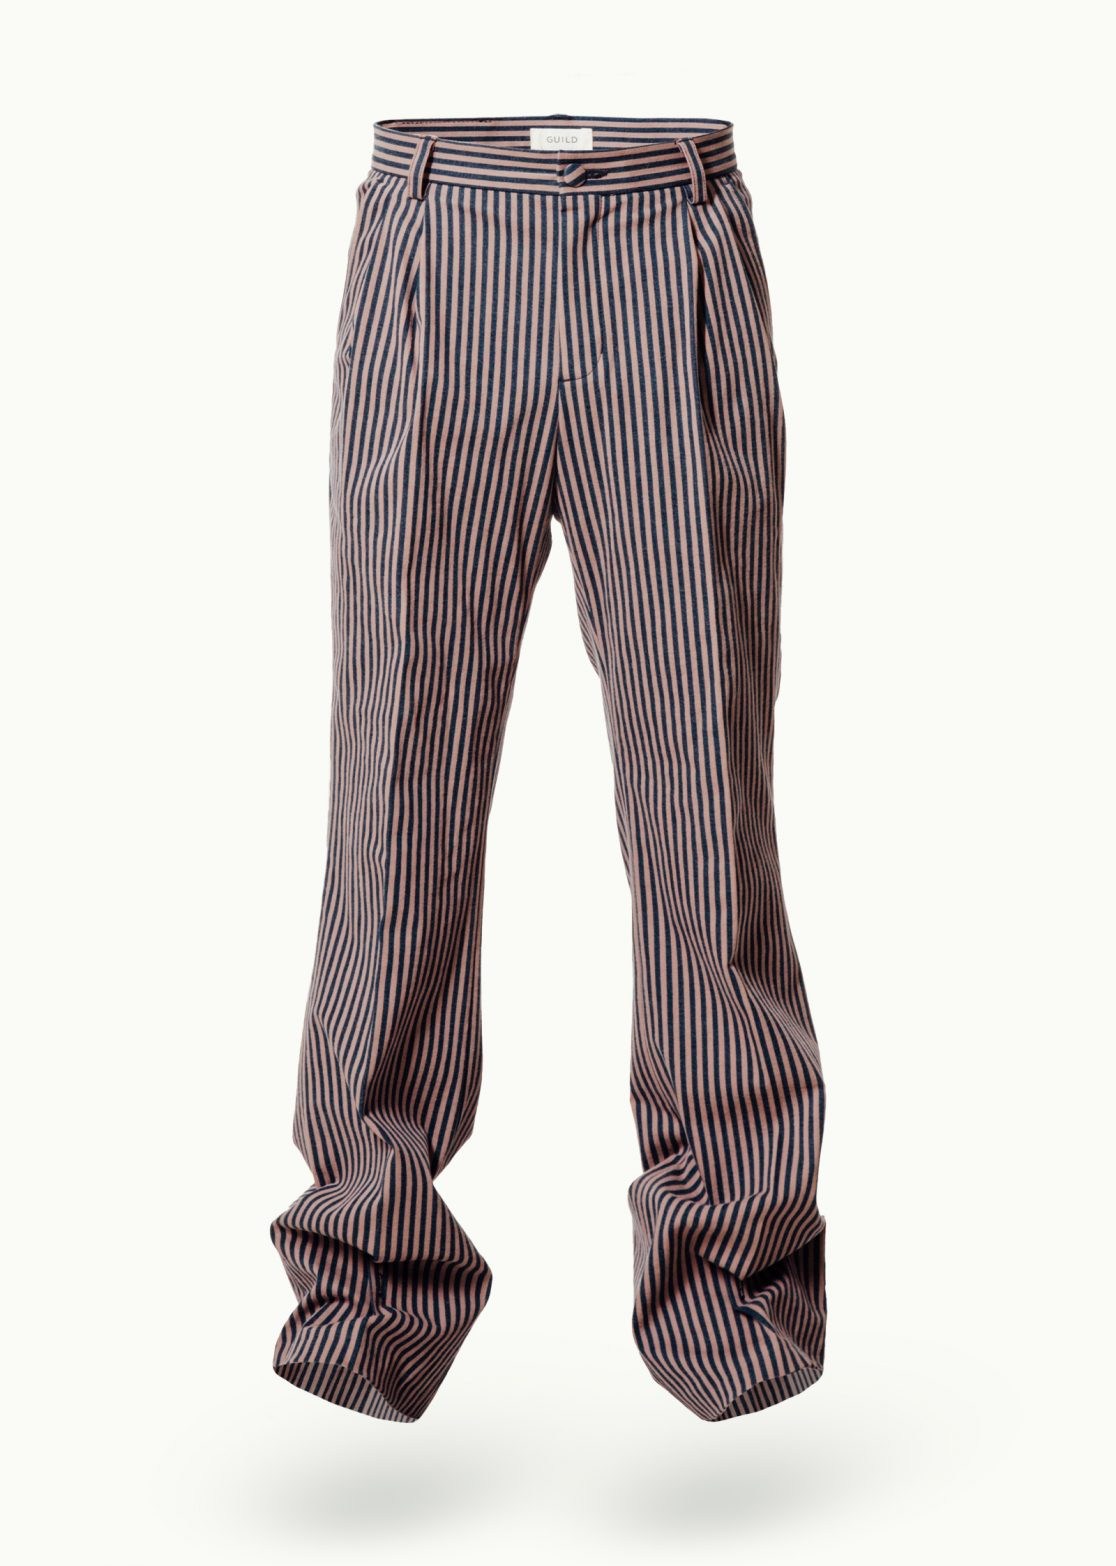 Men - Denim - Trousers - Paladin Trousers Mud Striped Image Primary